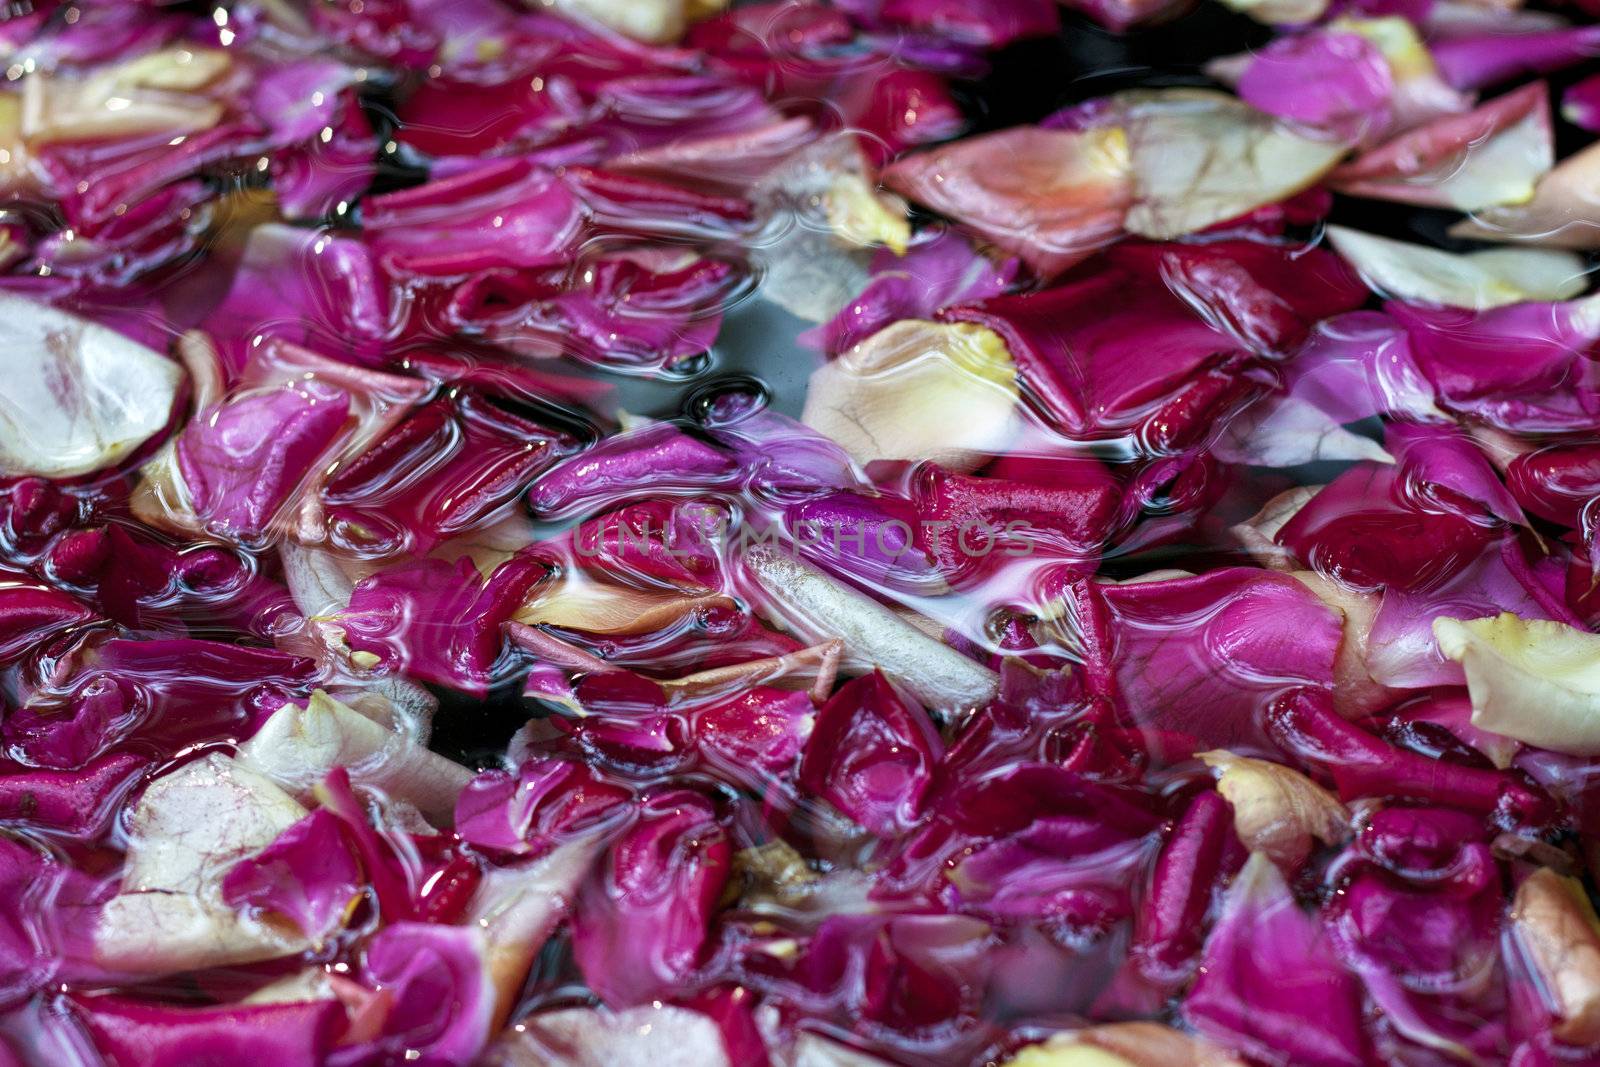 Rose petals in water, angle view by Lamarinx